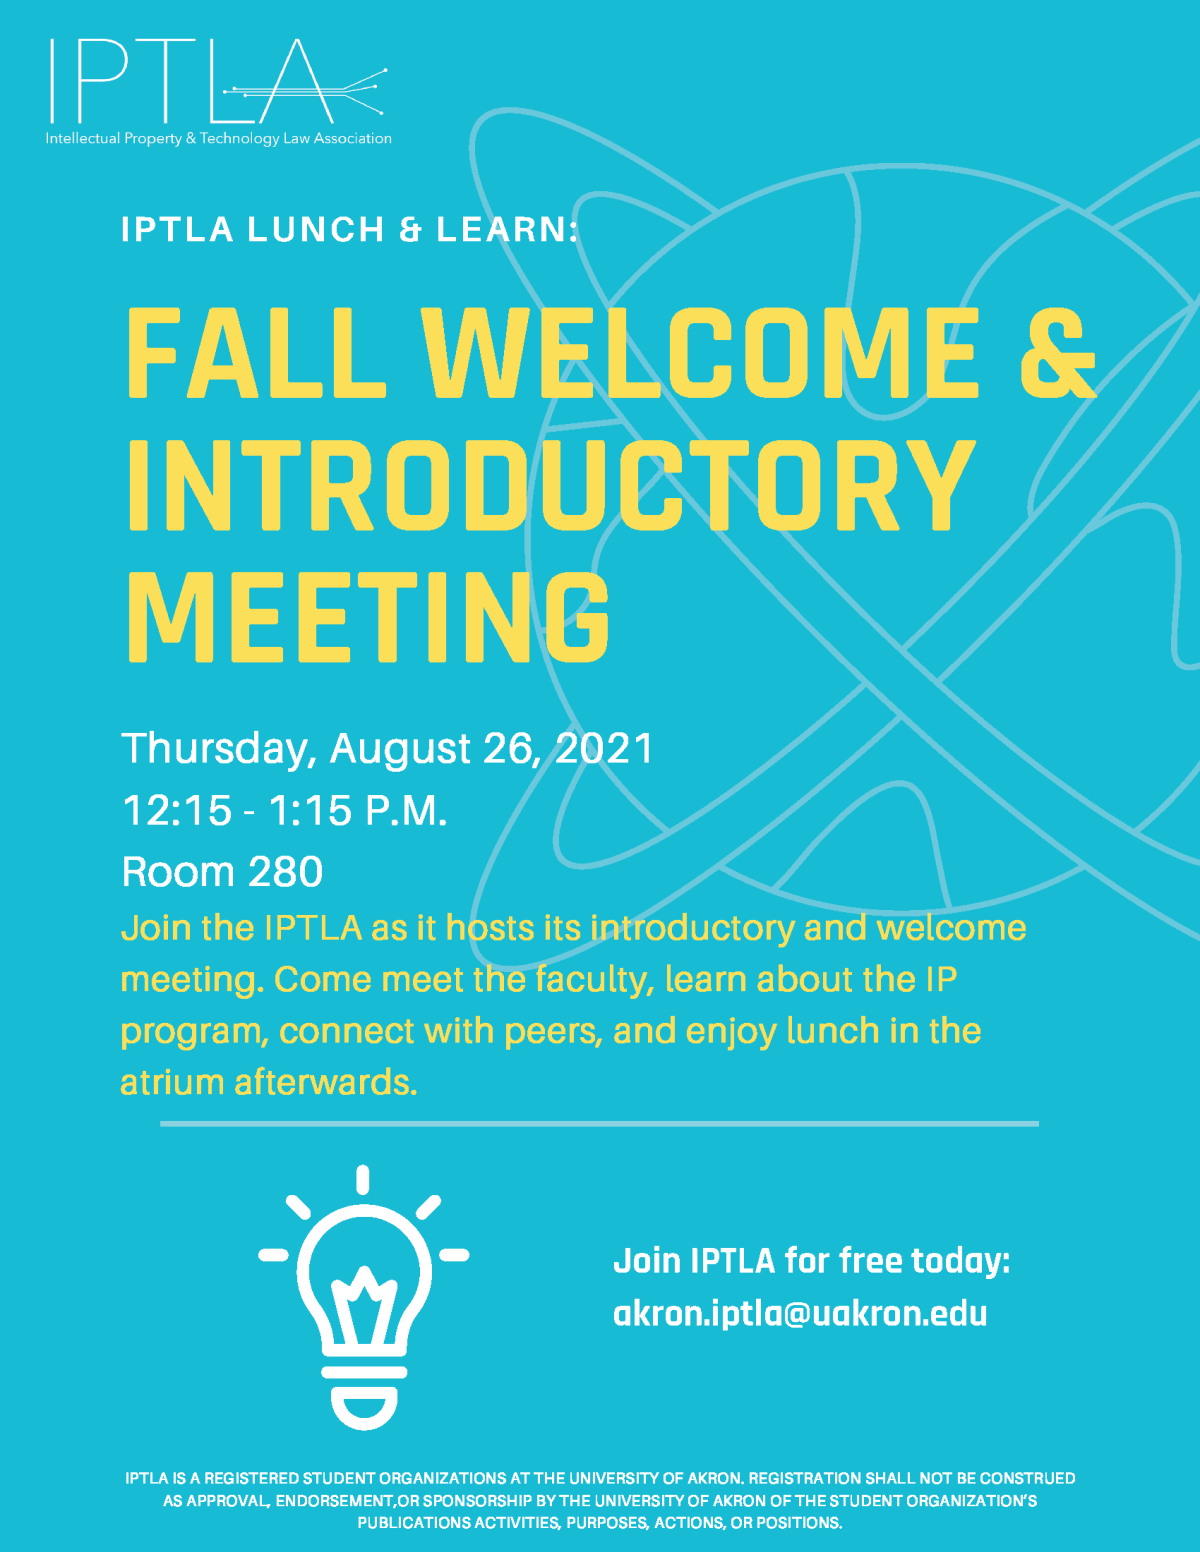 Join the IPTLA as it hosts its introductory and welcome meeting.